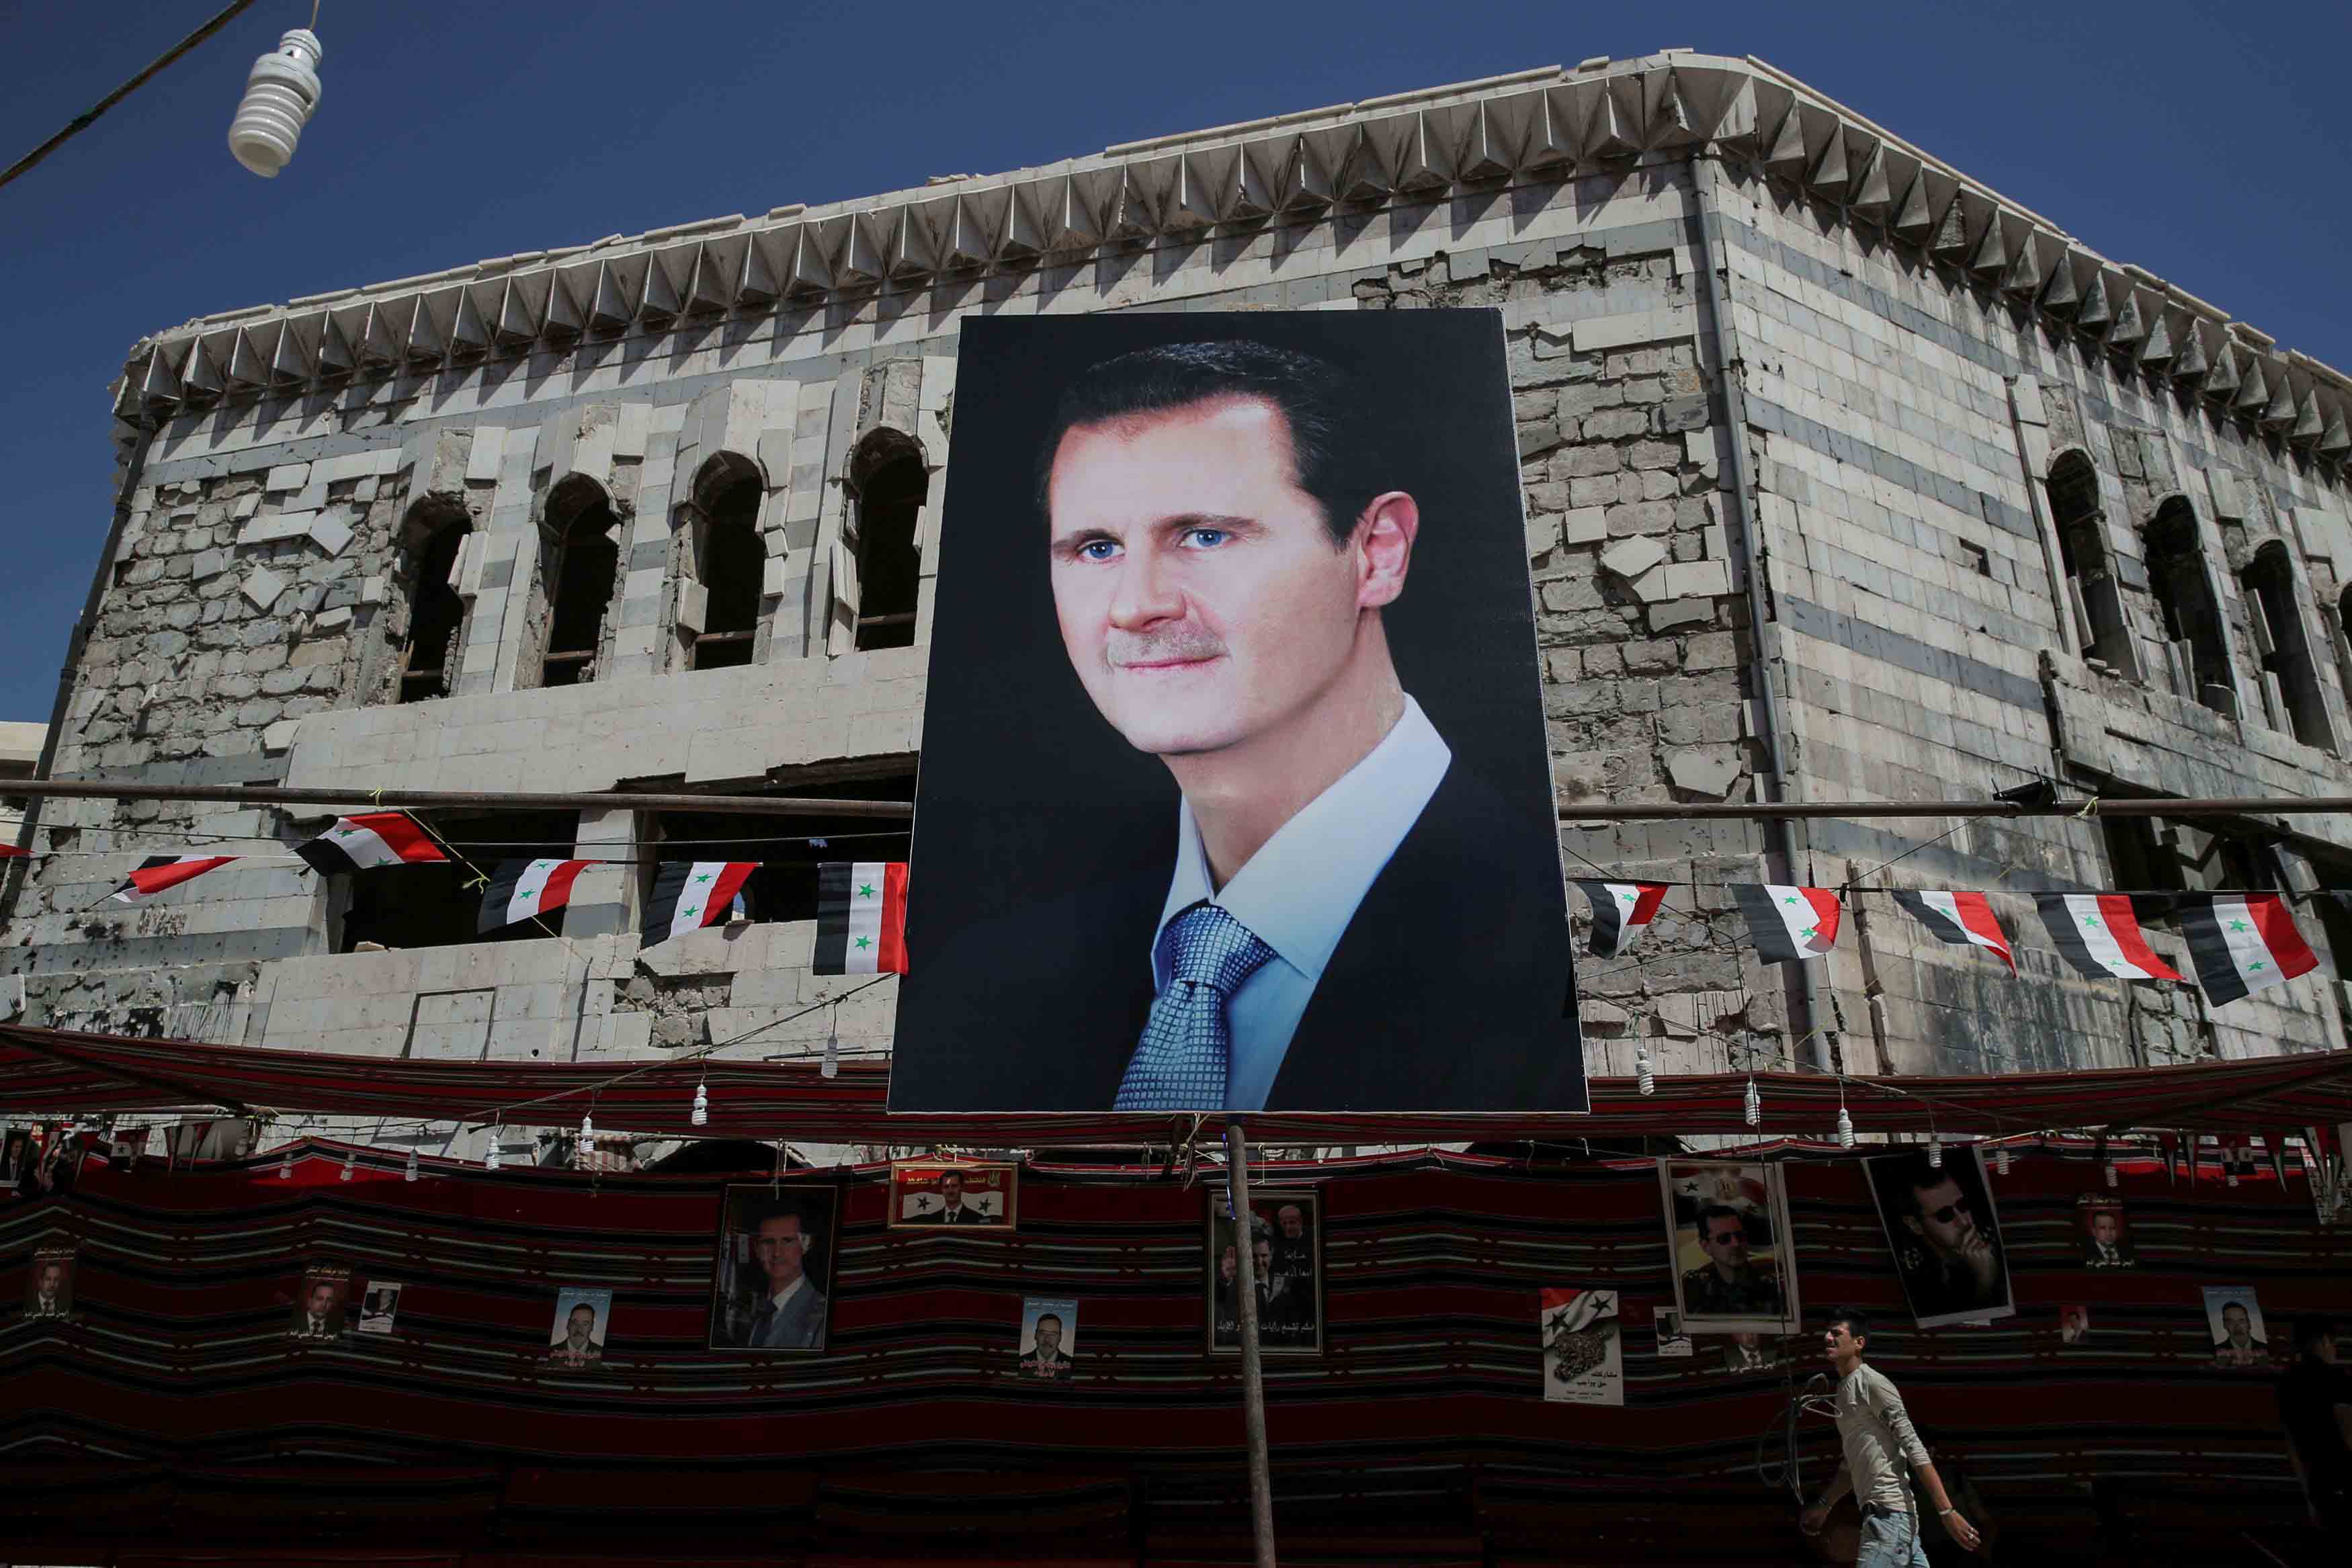 Even before any US troops pull out, a drive to bring Assad back into the Arab fold seems to have picked up momentum in recent weeks.